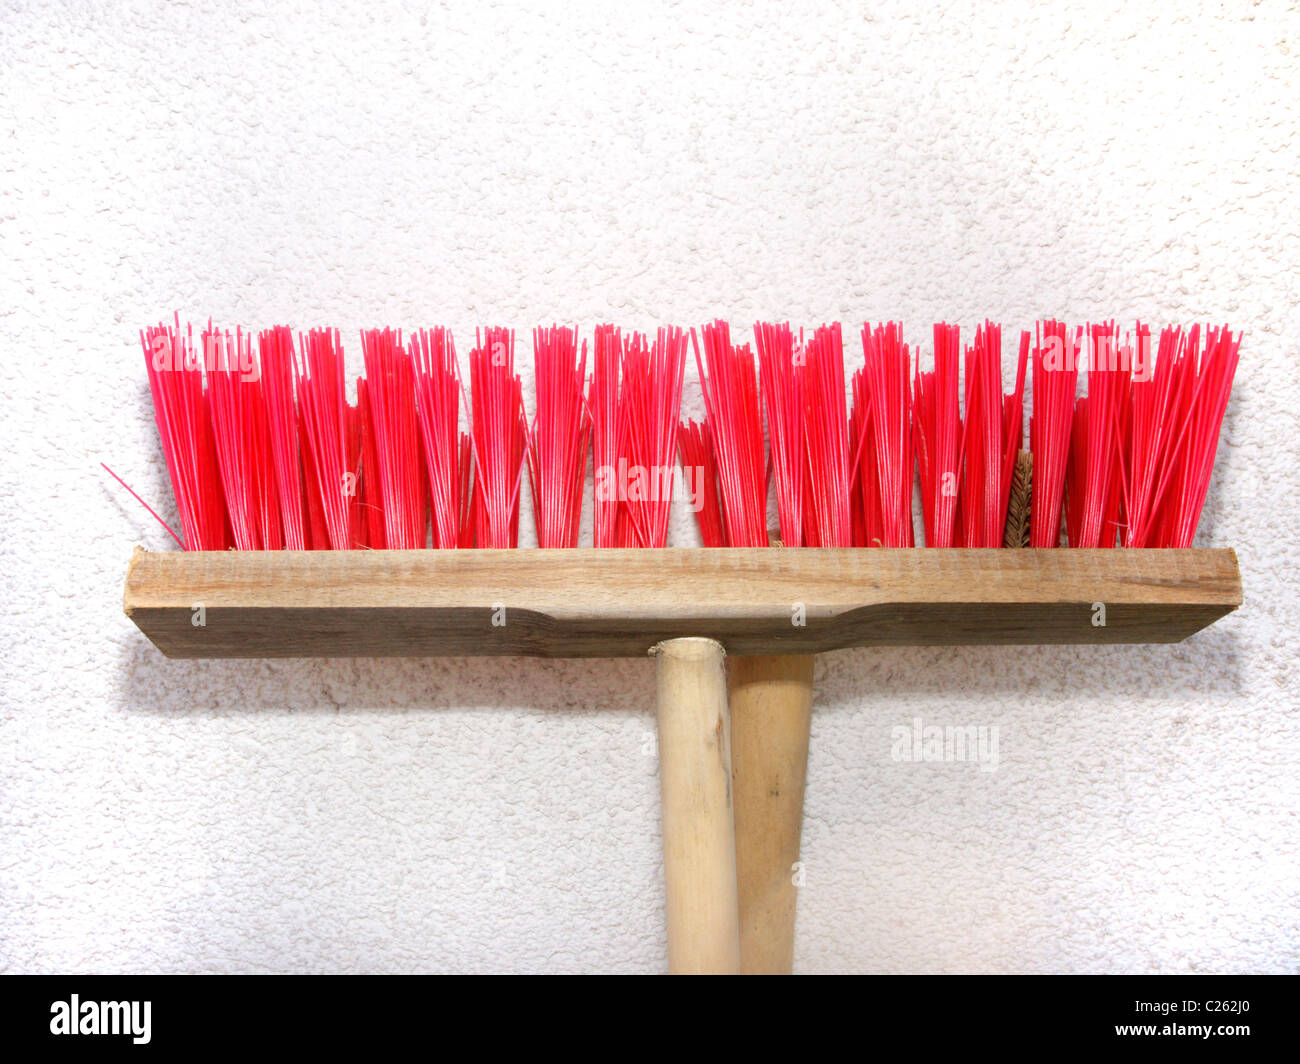 Brooms for garden use Stock Photo